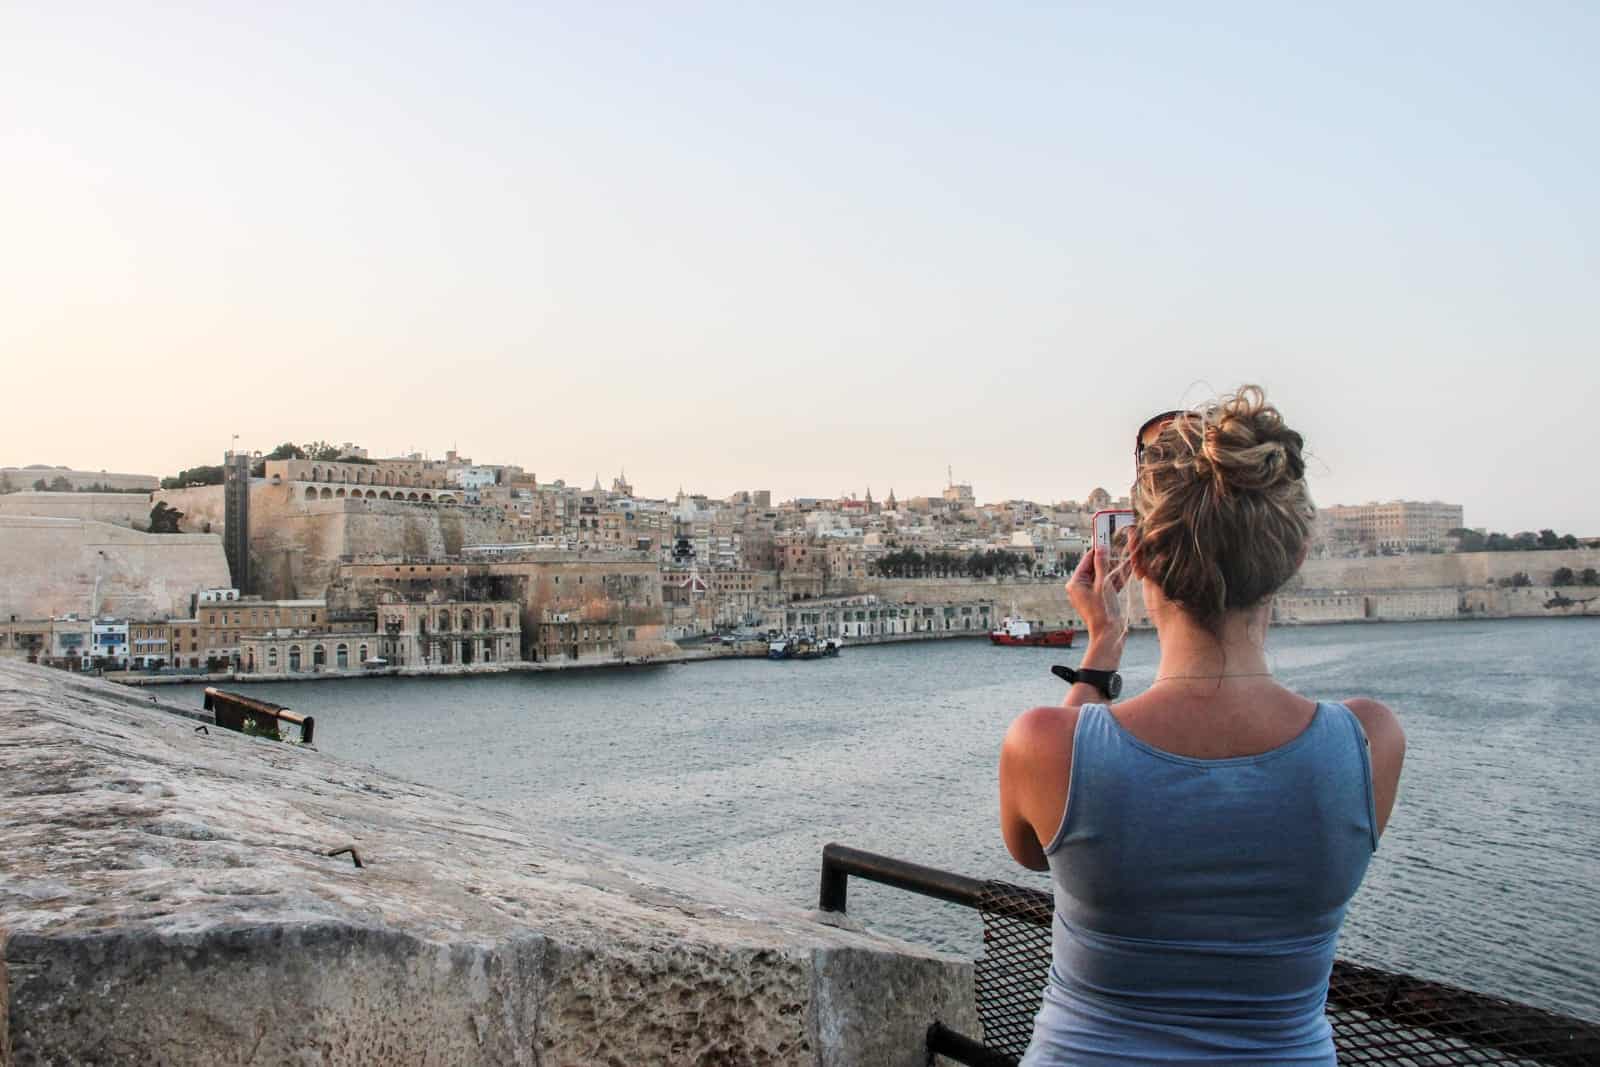 The viewpoint in Senglea in Malta with a hidden view to Valletta